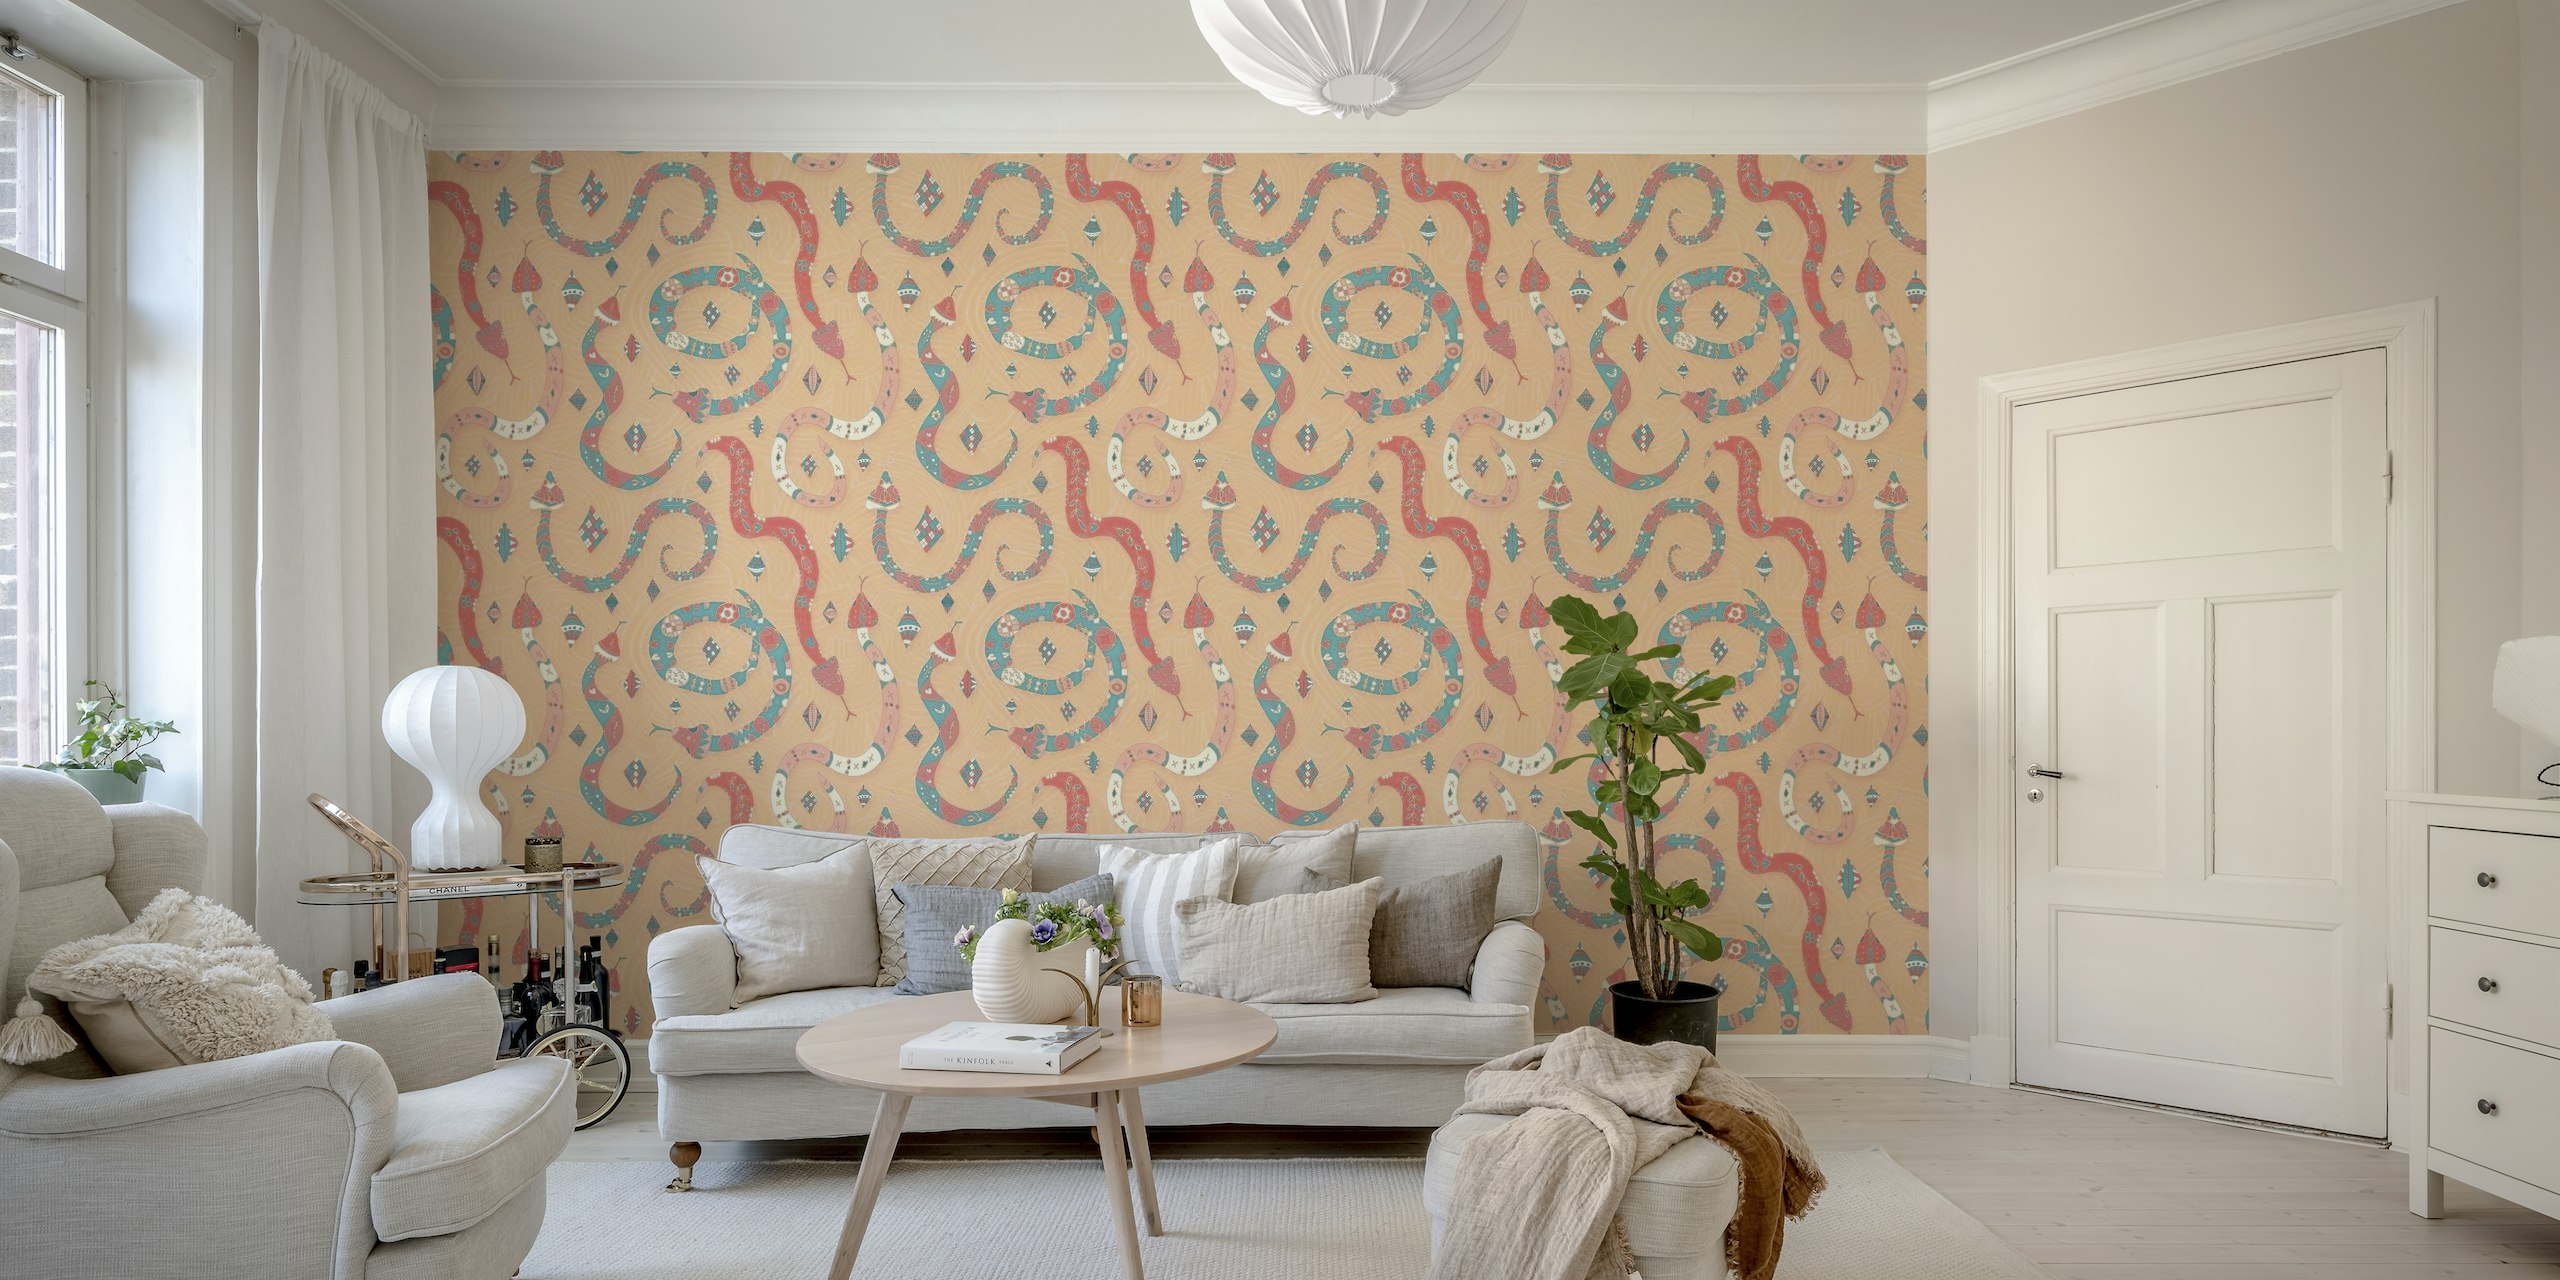 Illustrative peach-colored wall mural featuring red patterned snakes with decorative motifs